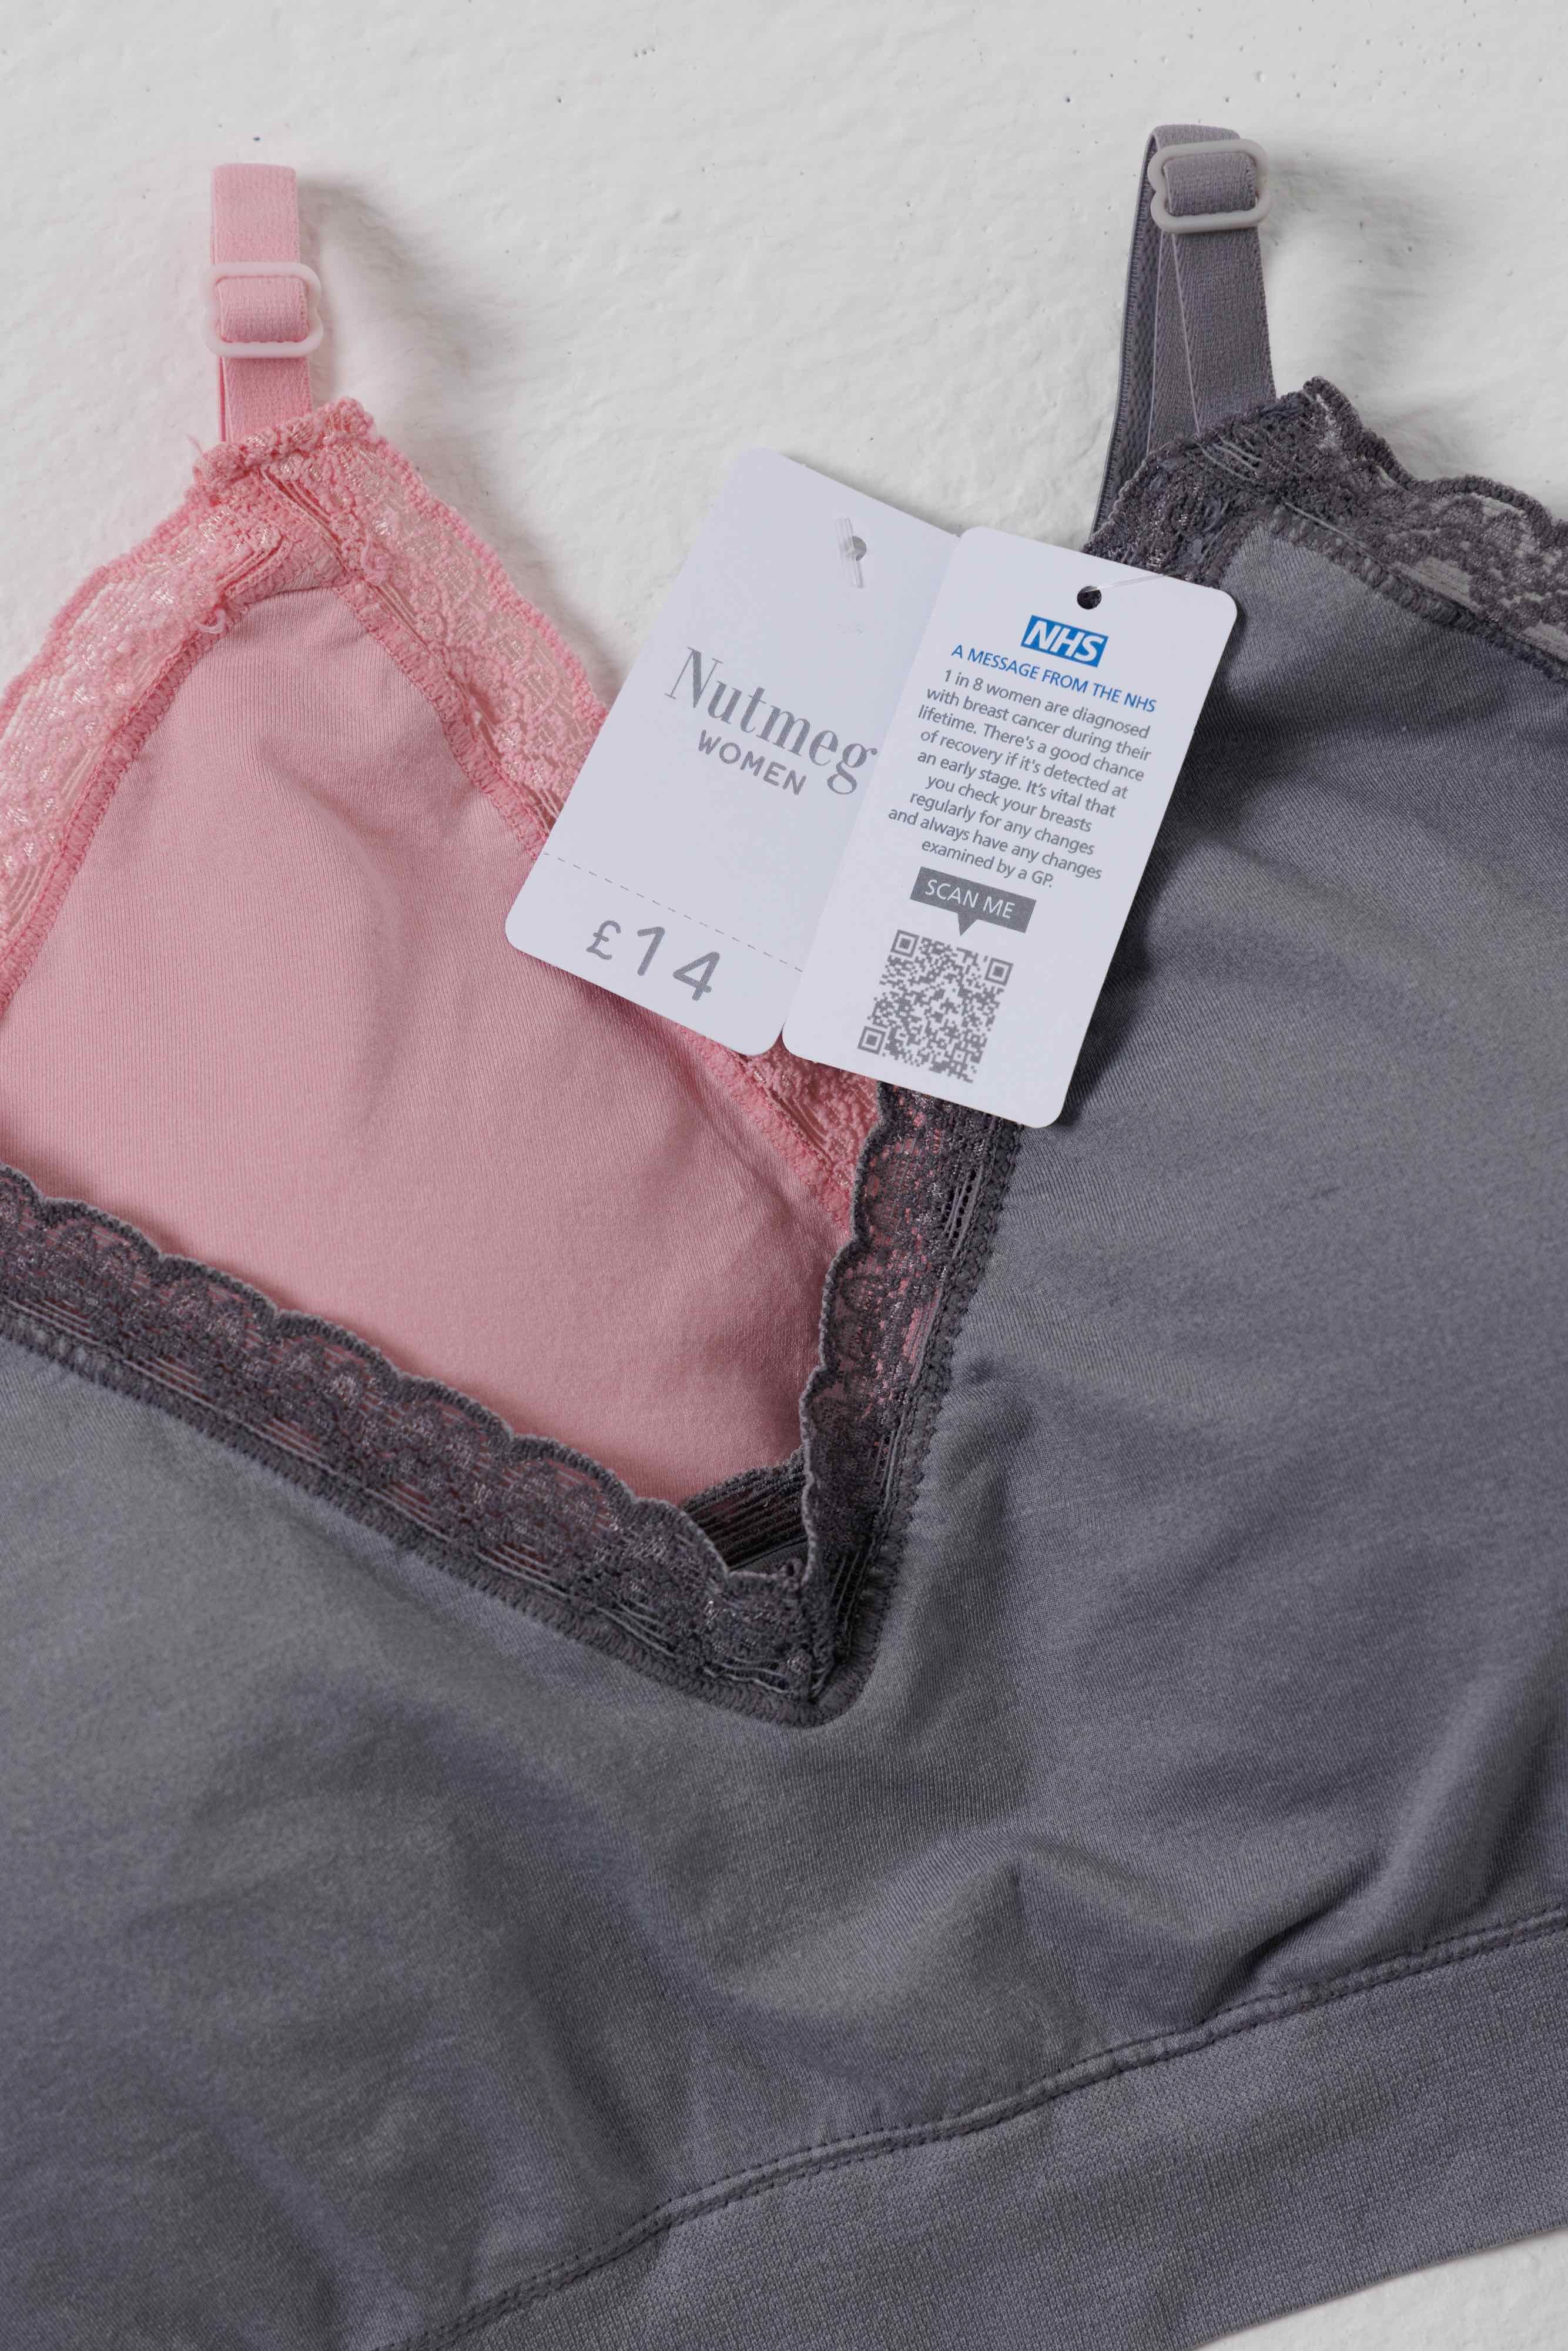 These bras are designed to help women detect breast cancer